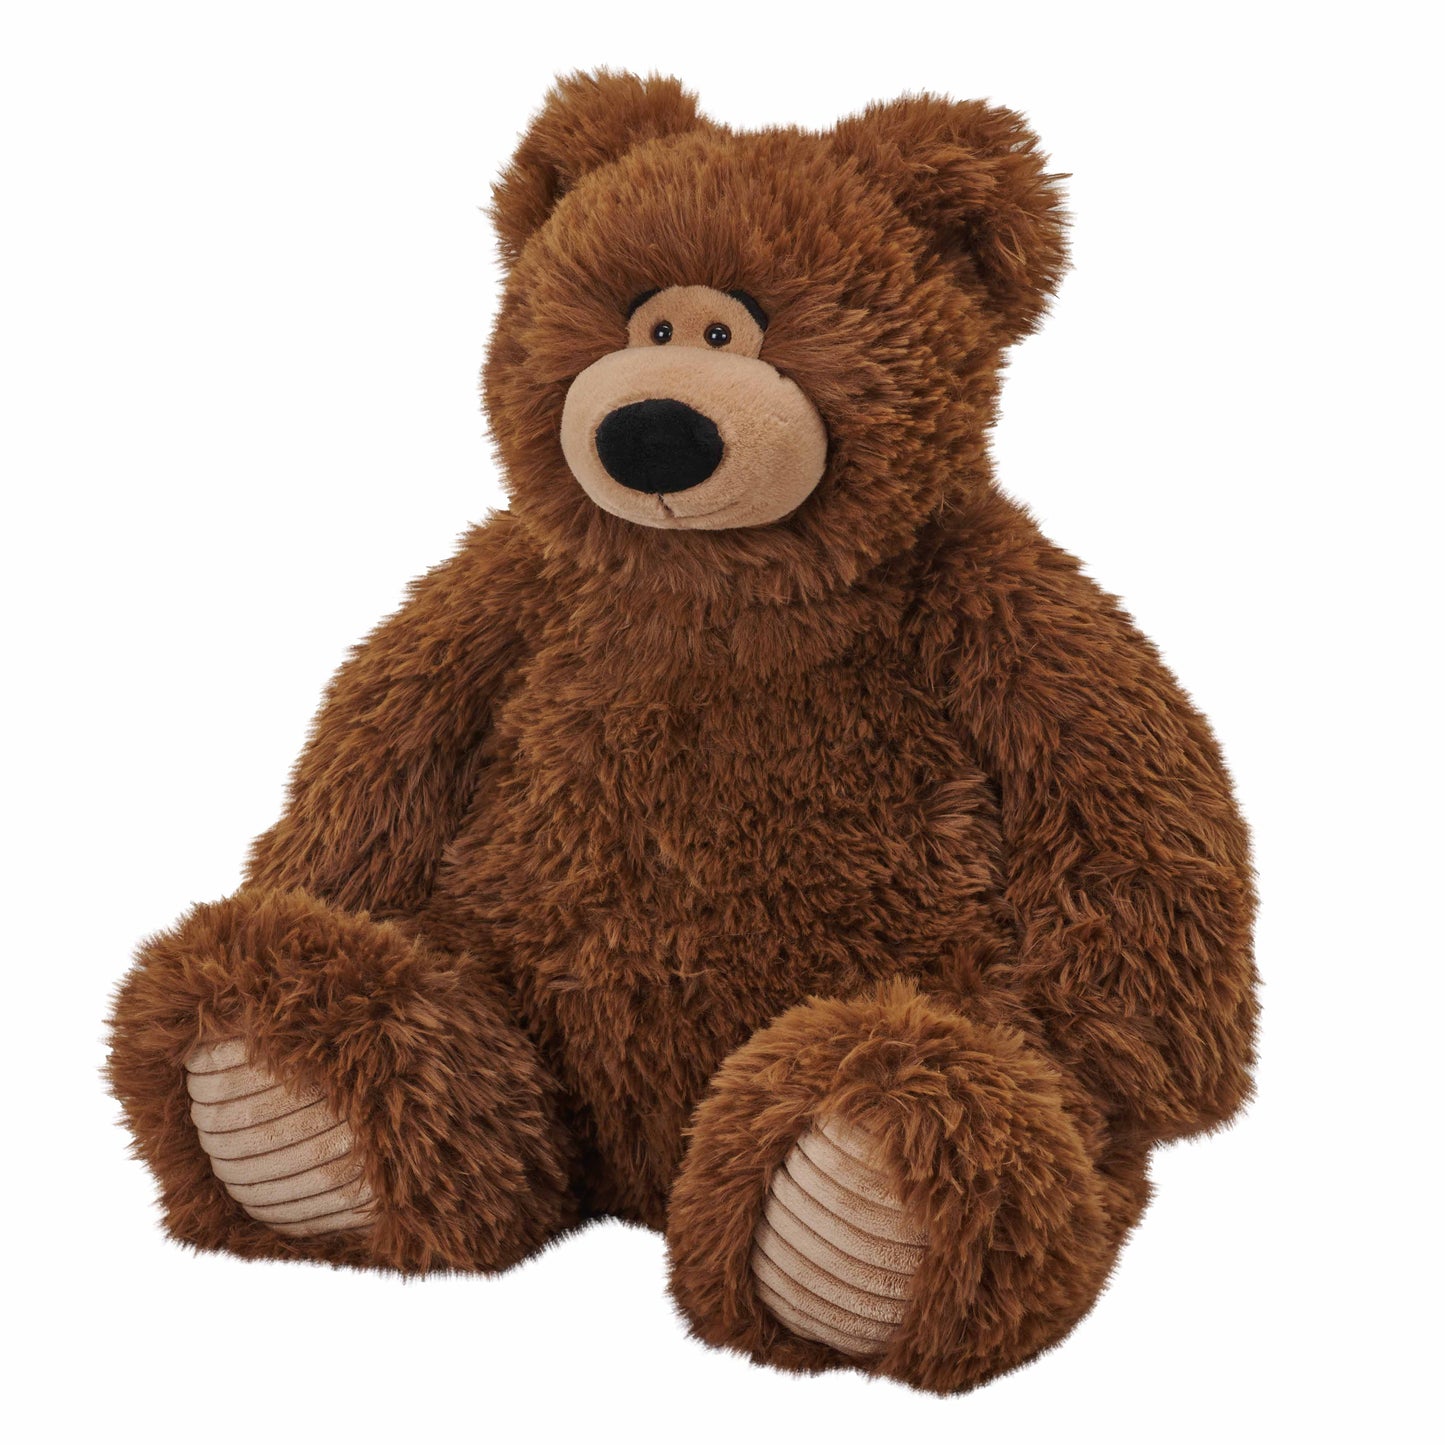 Snuggleluvs Weighted Plush Brown Bear